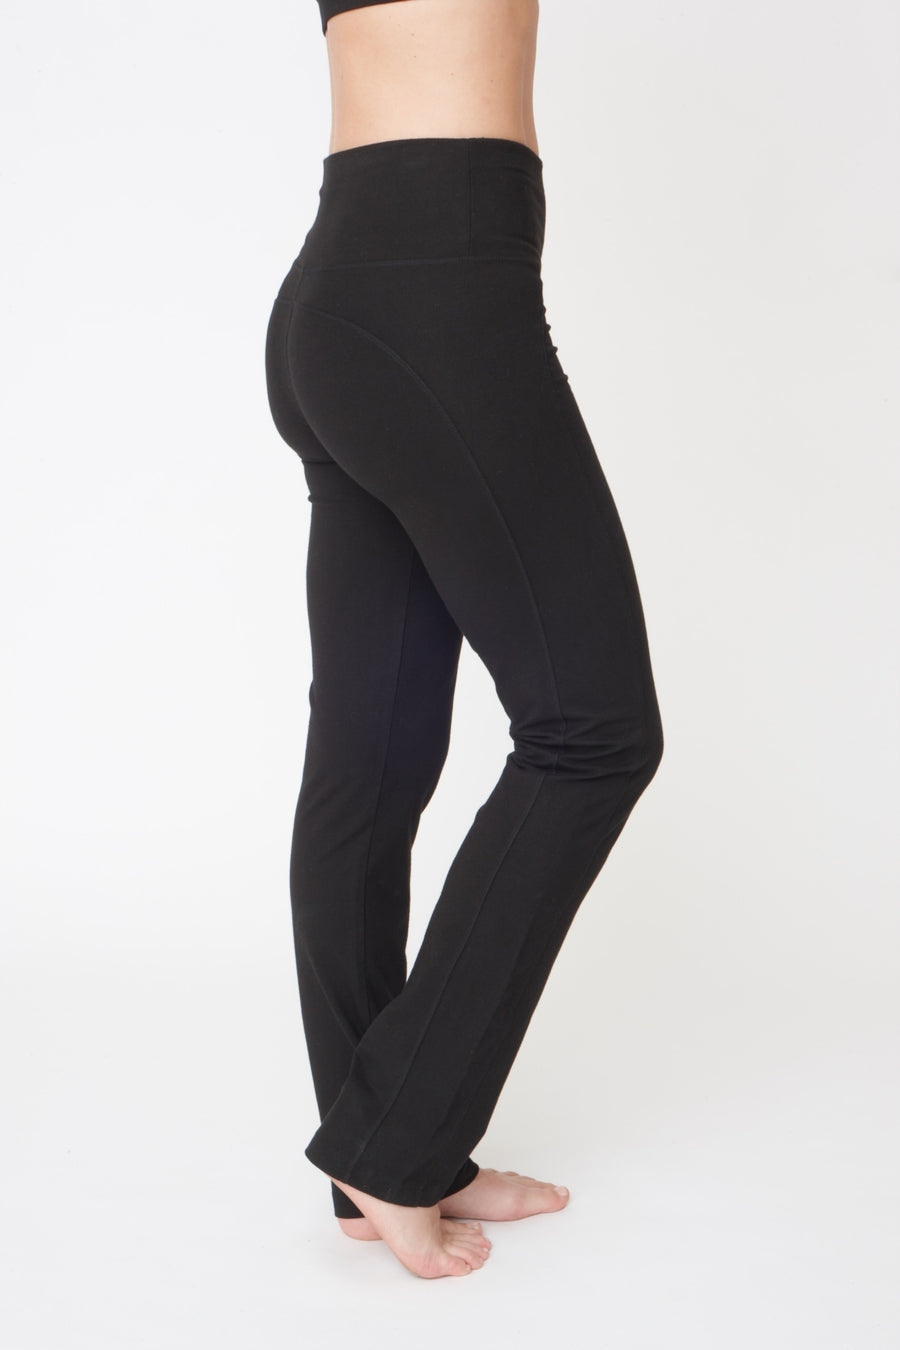 Live Fast Pants - Black - Asquith